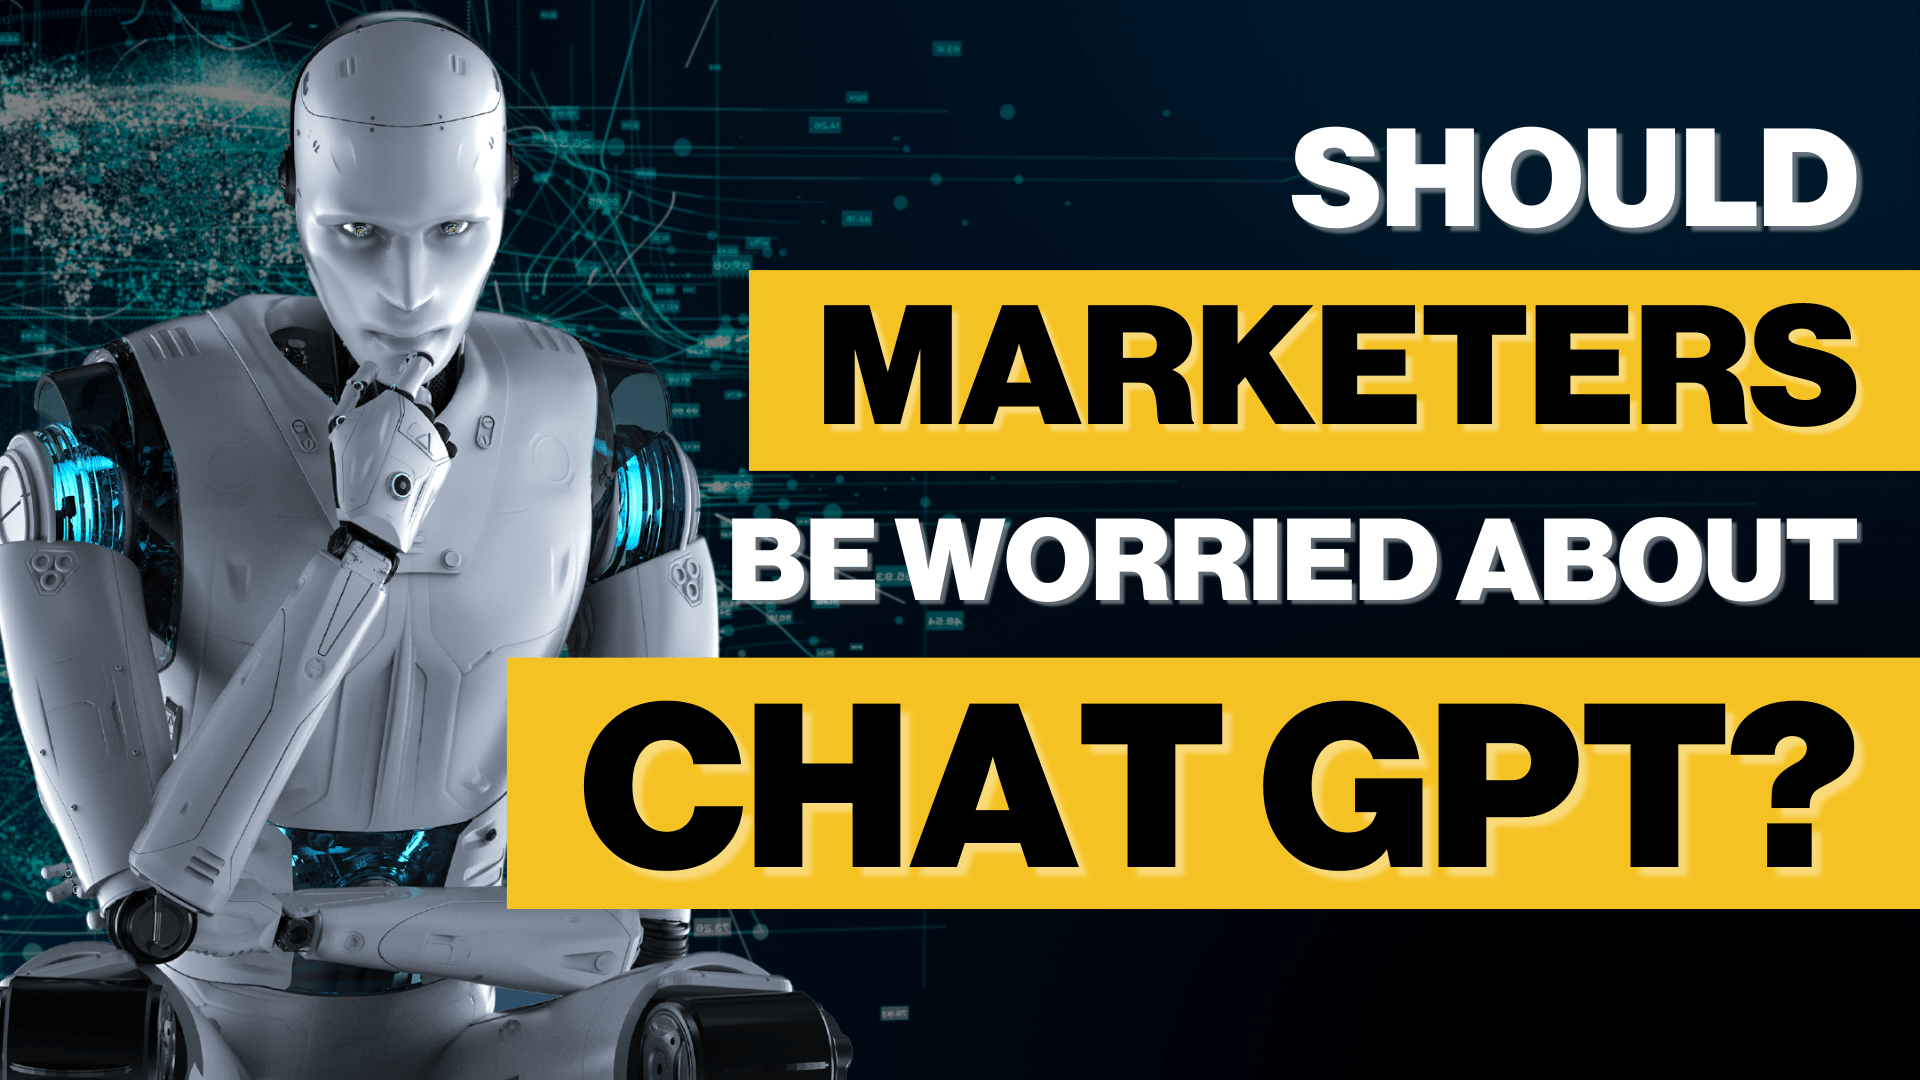 Should Marketers Be Worried About Chat GPT